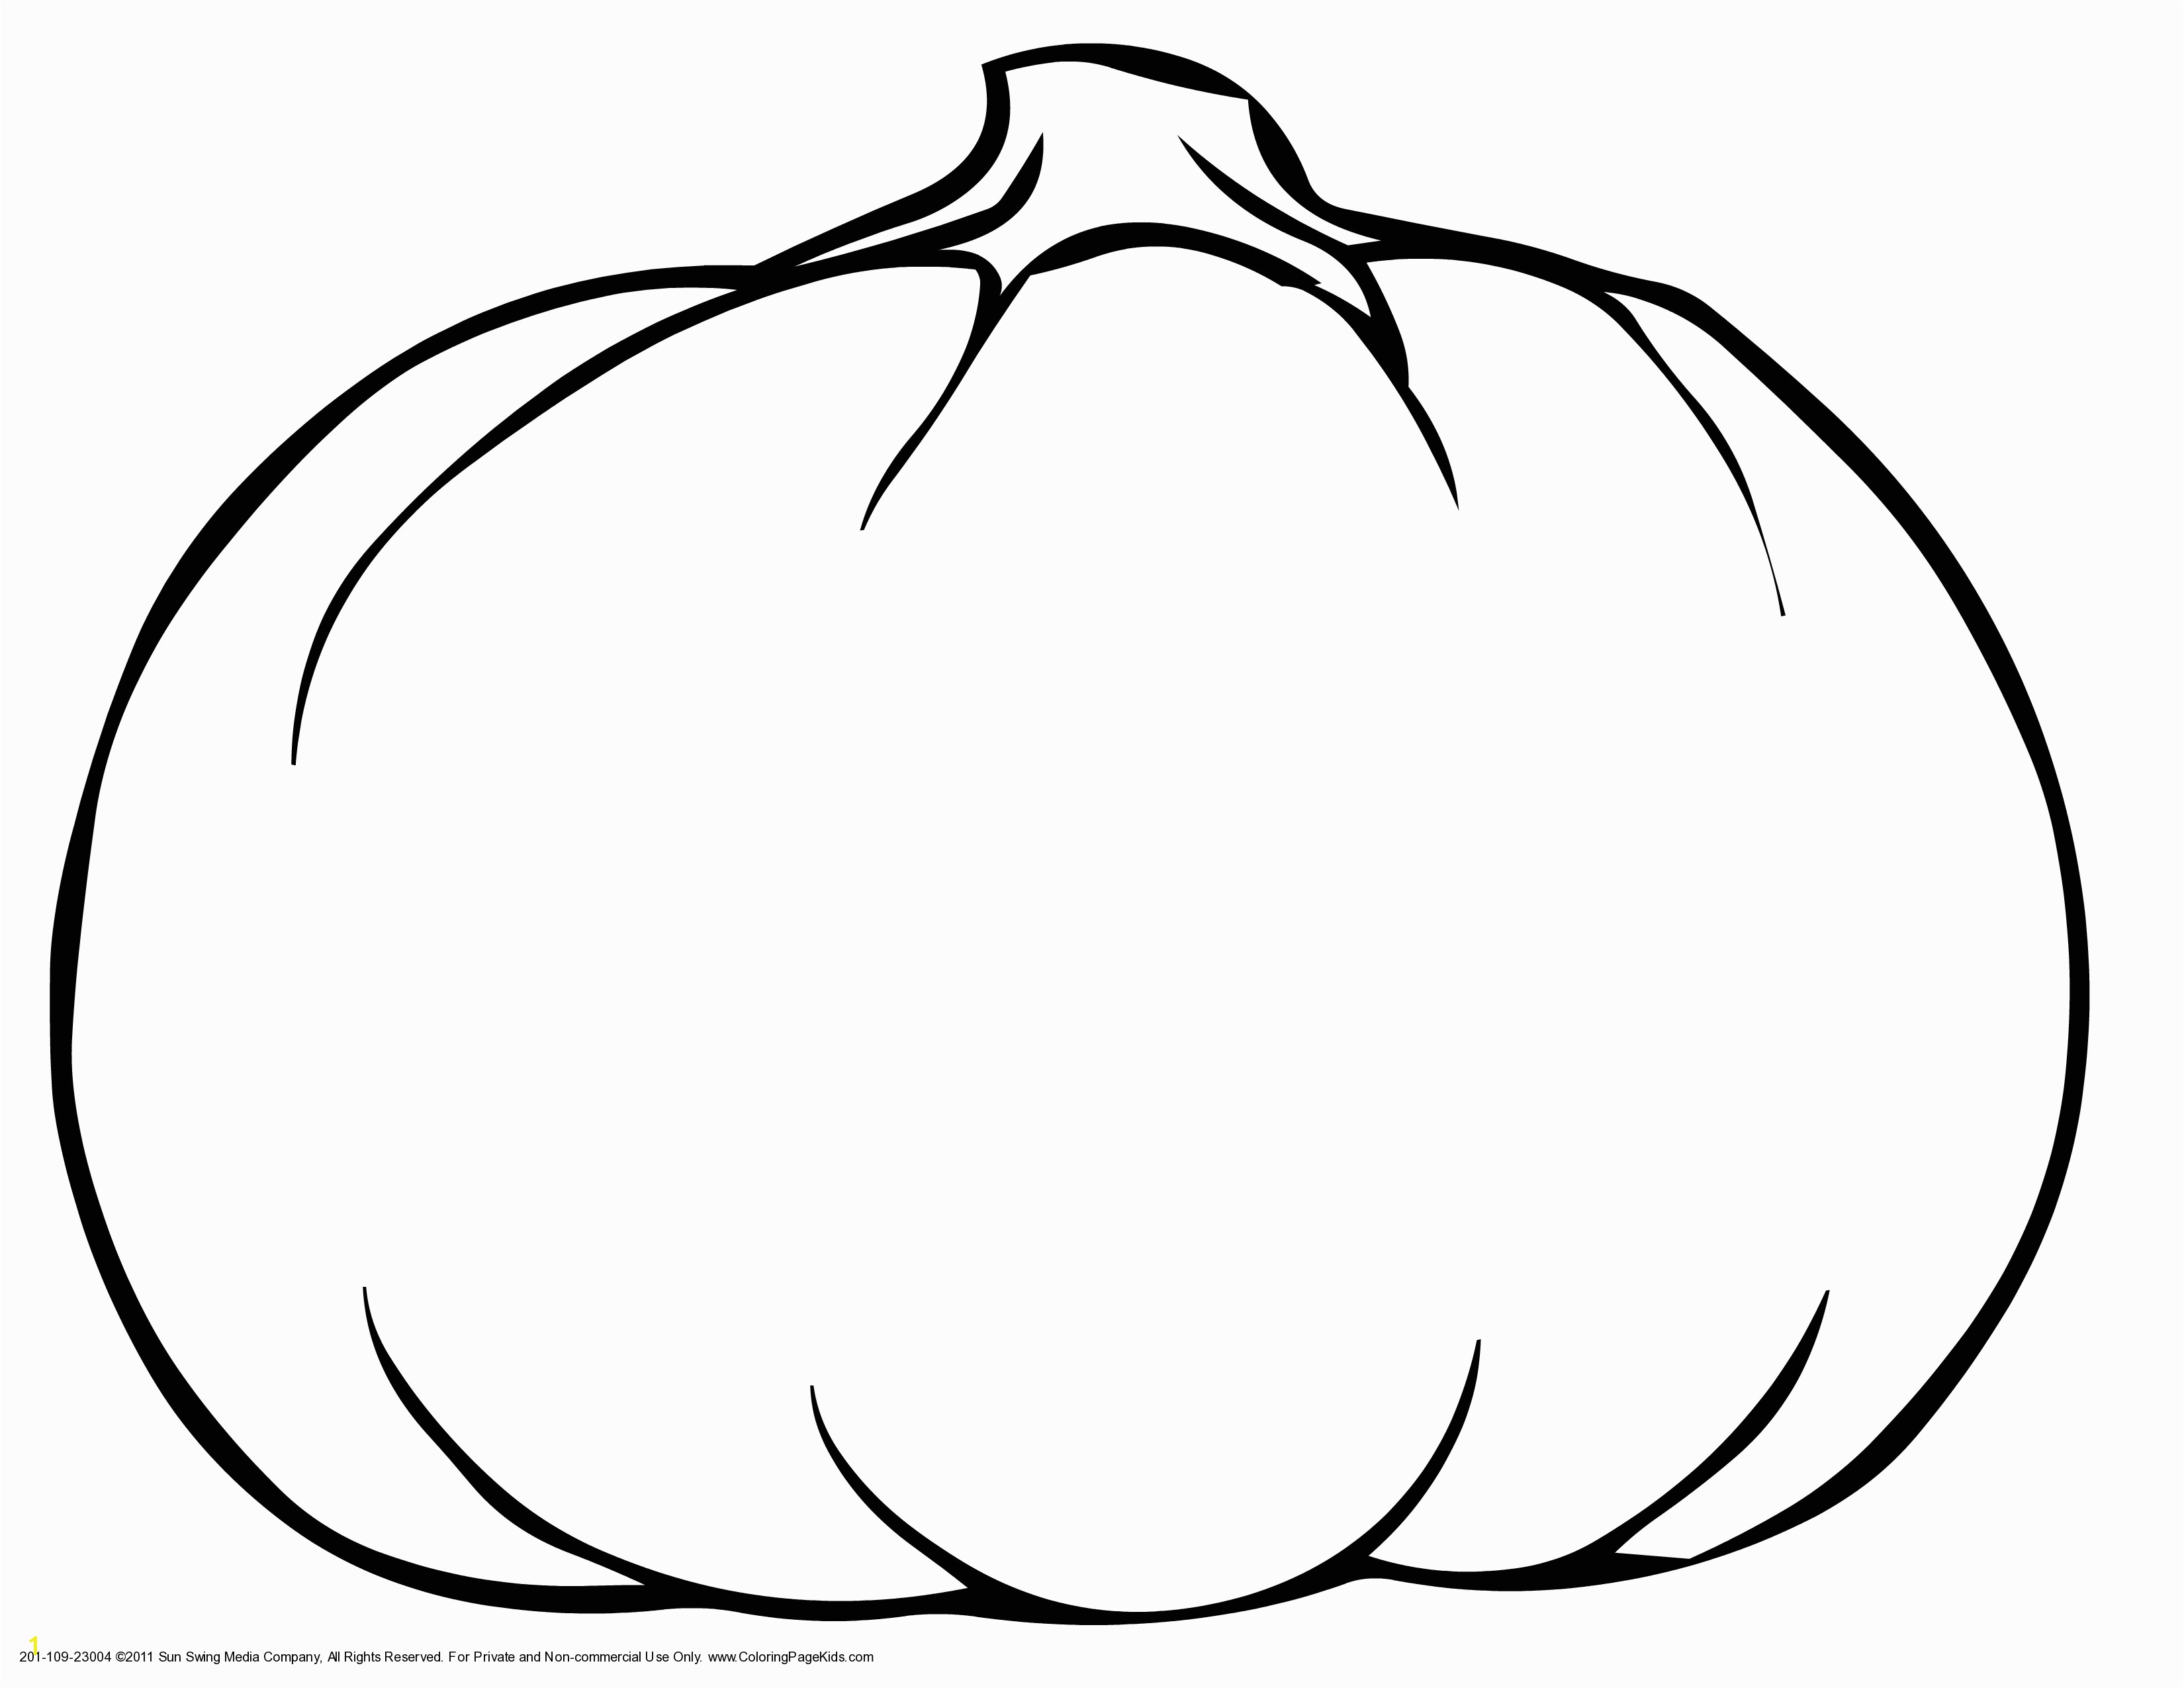 This is best Pumpkin Outline Printable Coloring Pages Pumpkins Colorine Net for your project or presentation to use for personal or mersial